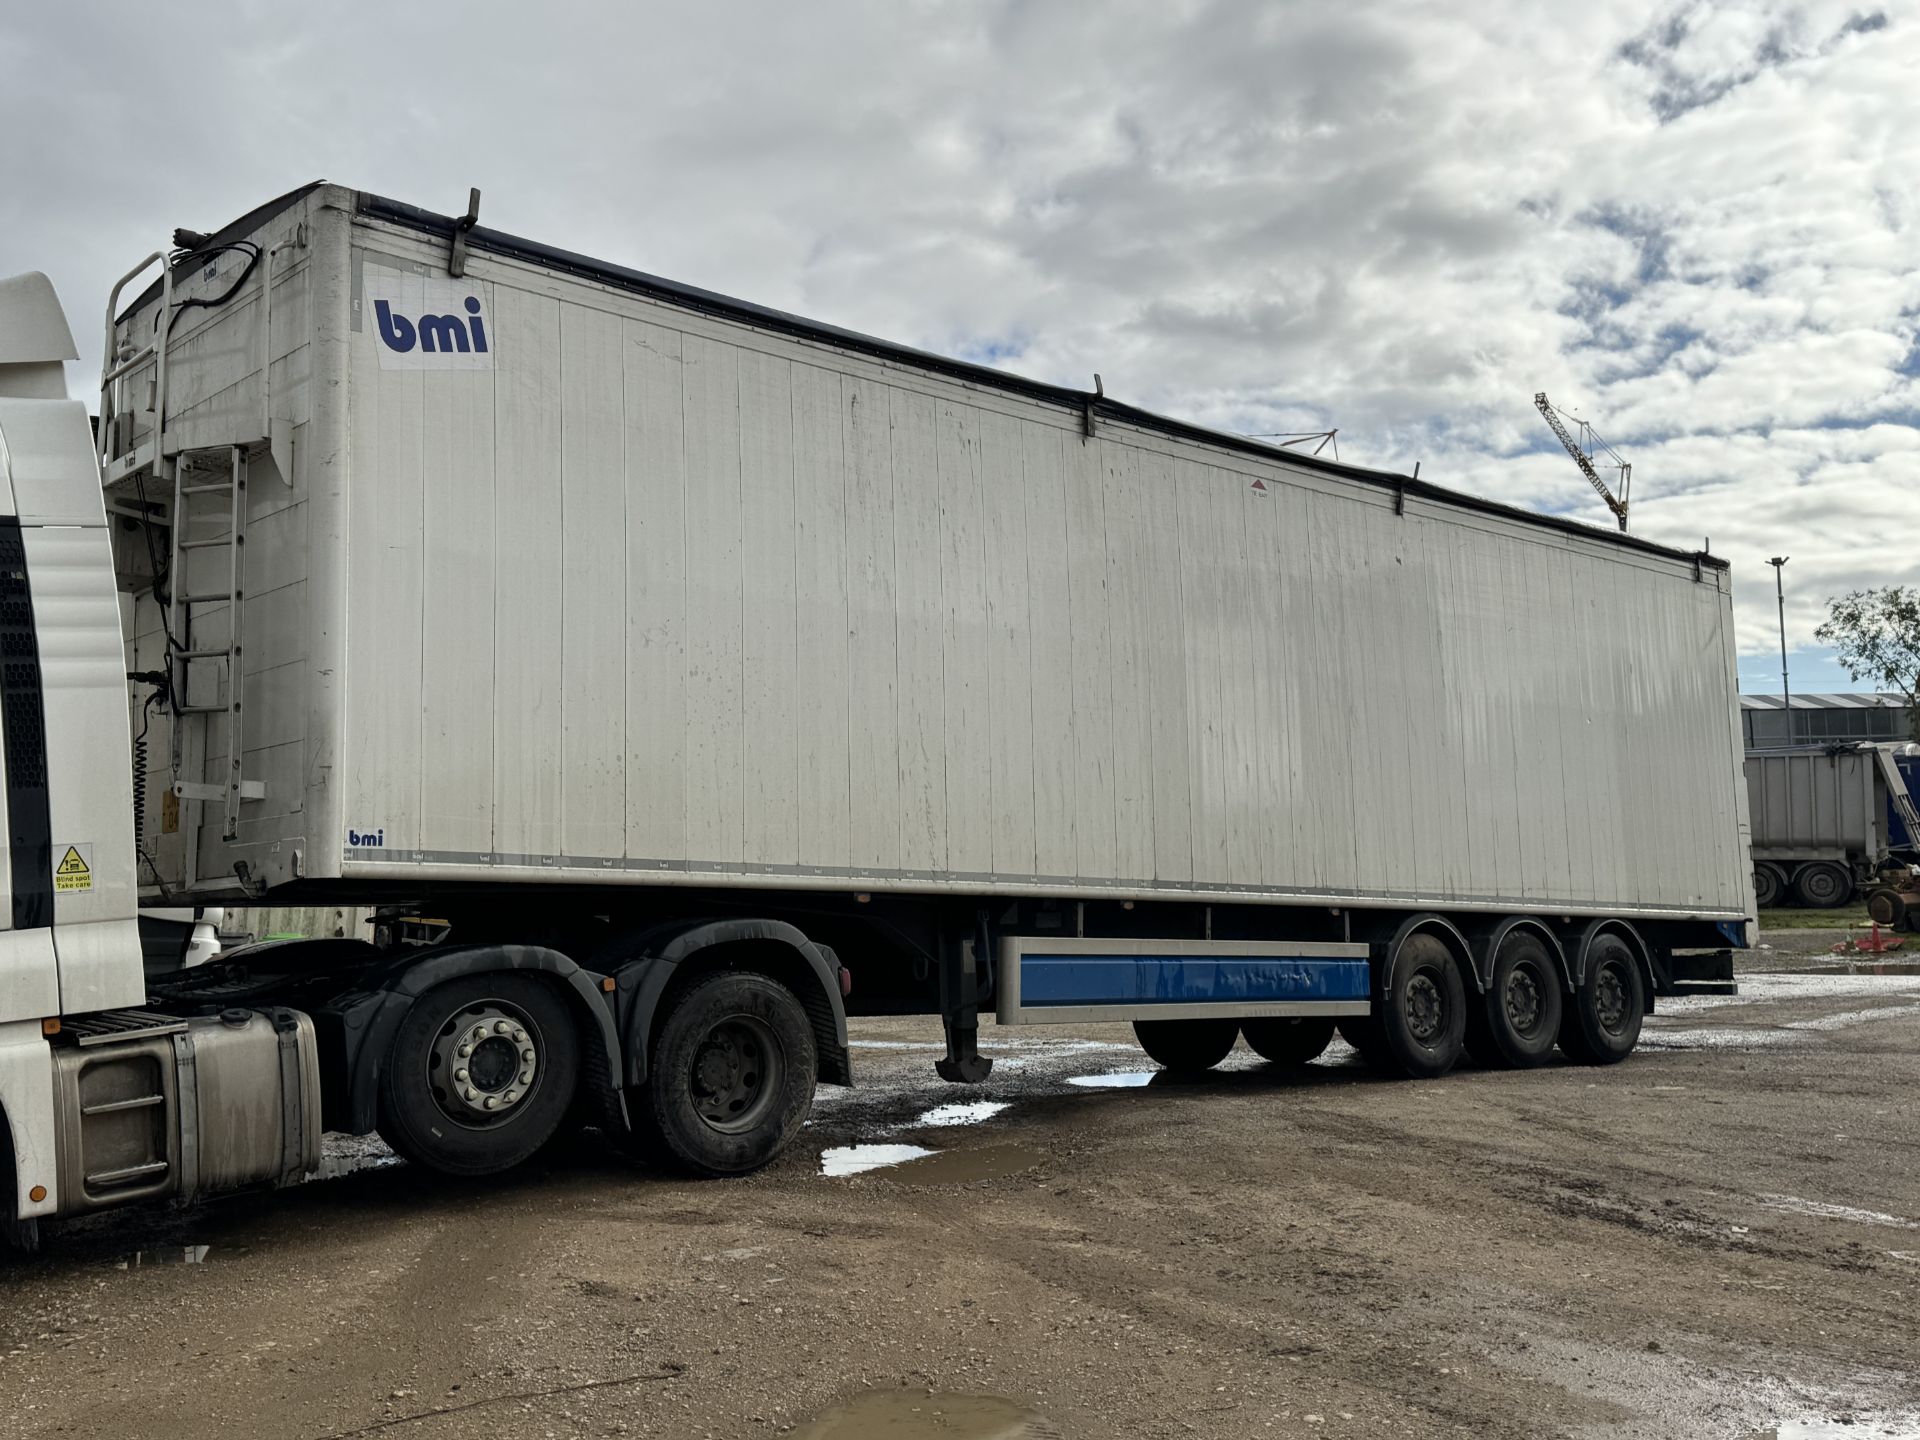 2017 - BMI Trailers Type AW 125, Tri Axle Air Suspension 125 Yard Cargo Floor Trailer - Image 9 of 46